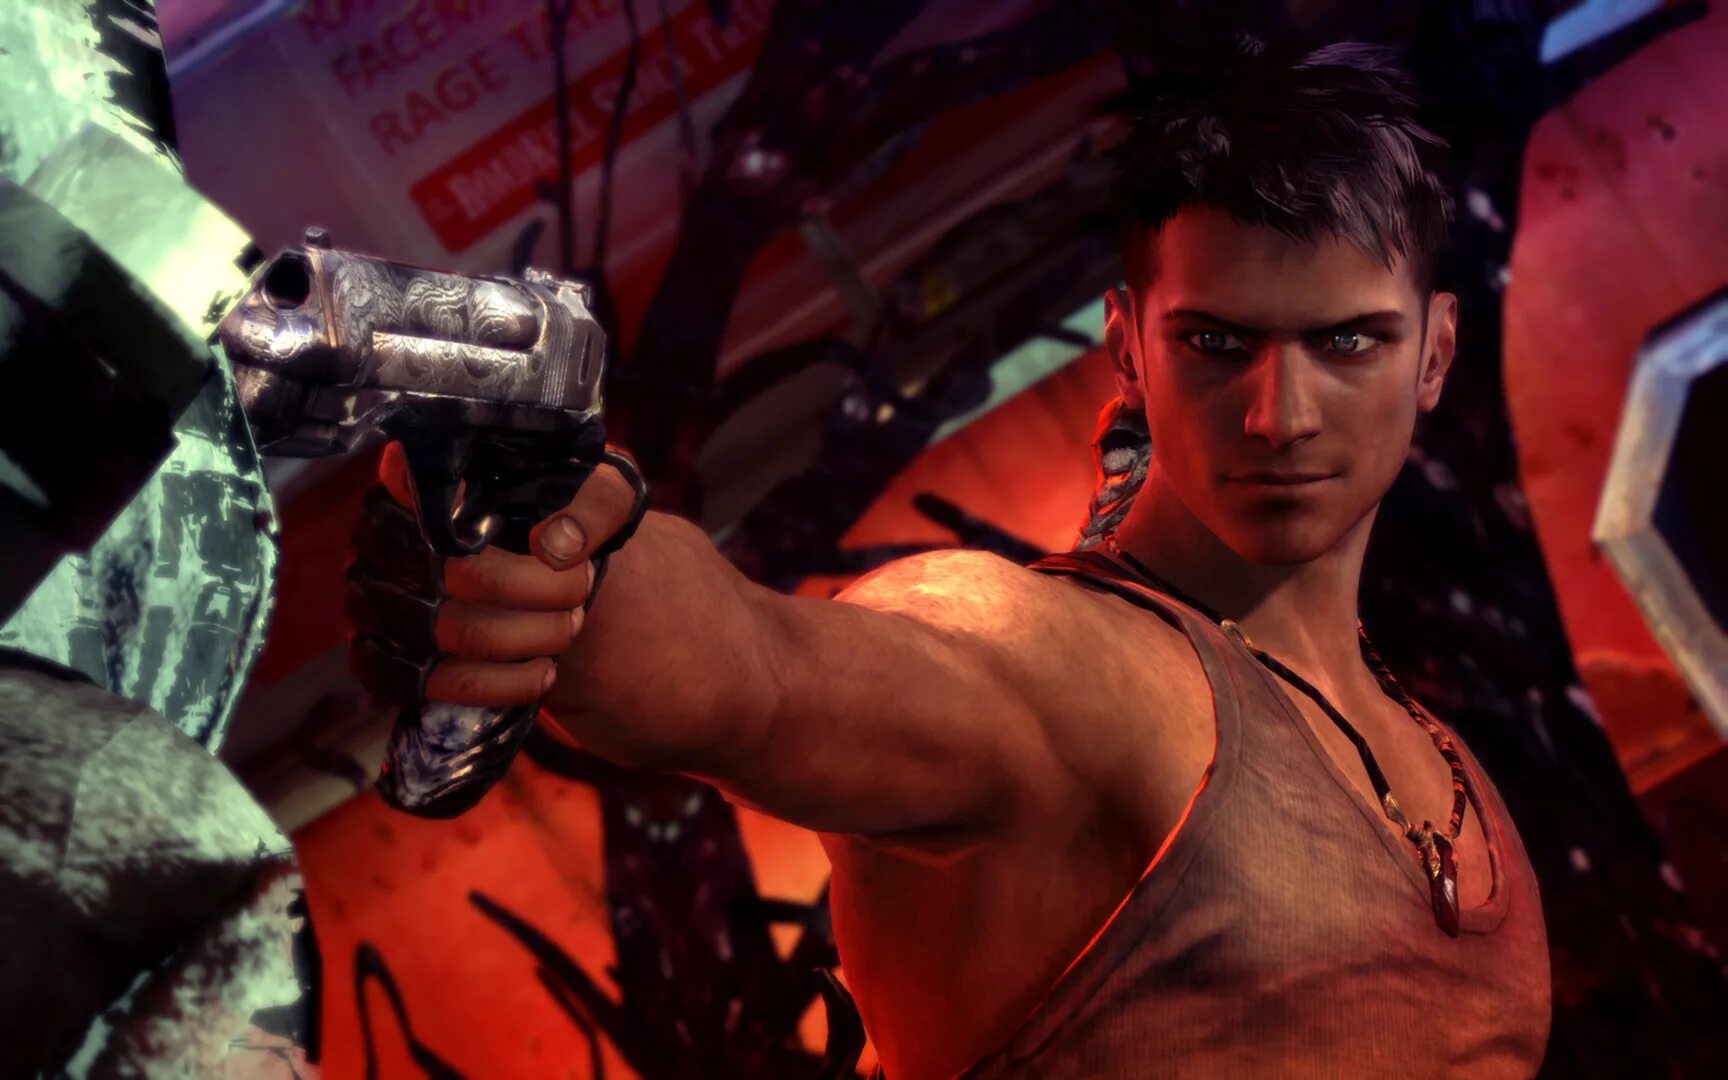 DMC Devil May Cry Данте. Devil May Cry 2013 Dante. DMC Devil May Cry Dante 2013. DMC Devil May Cry 2013 Данте.